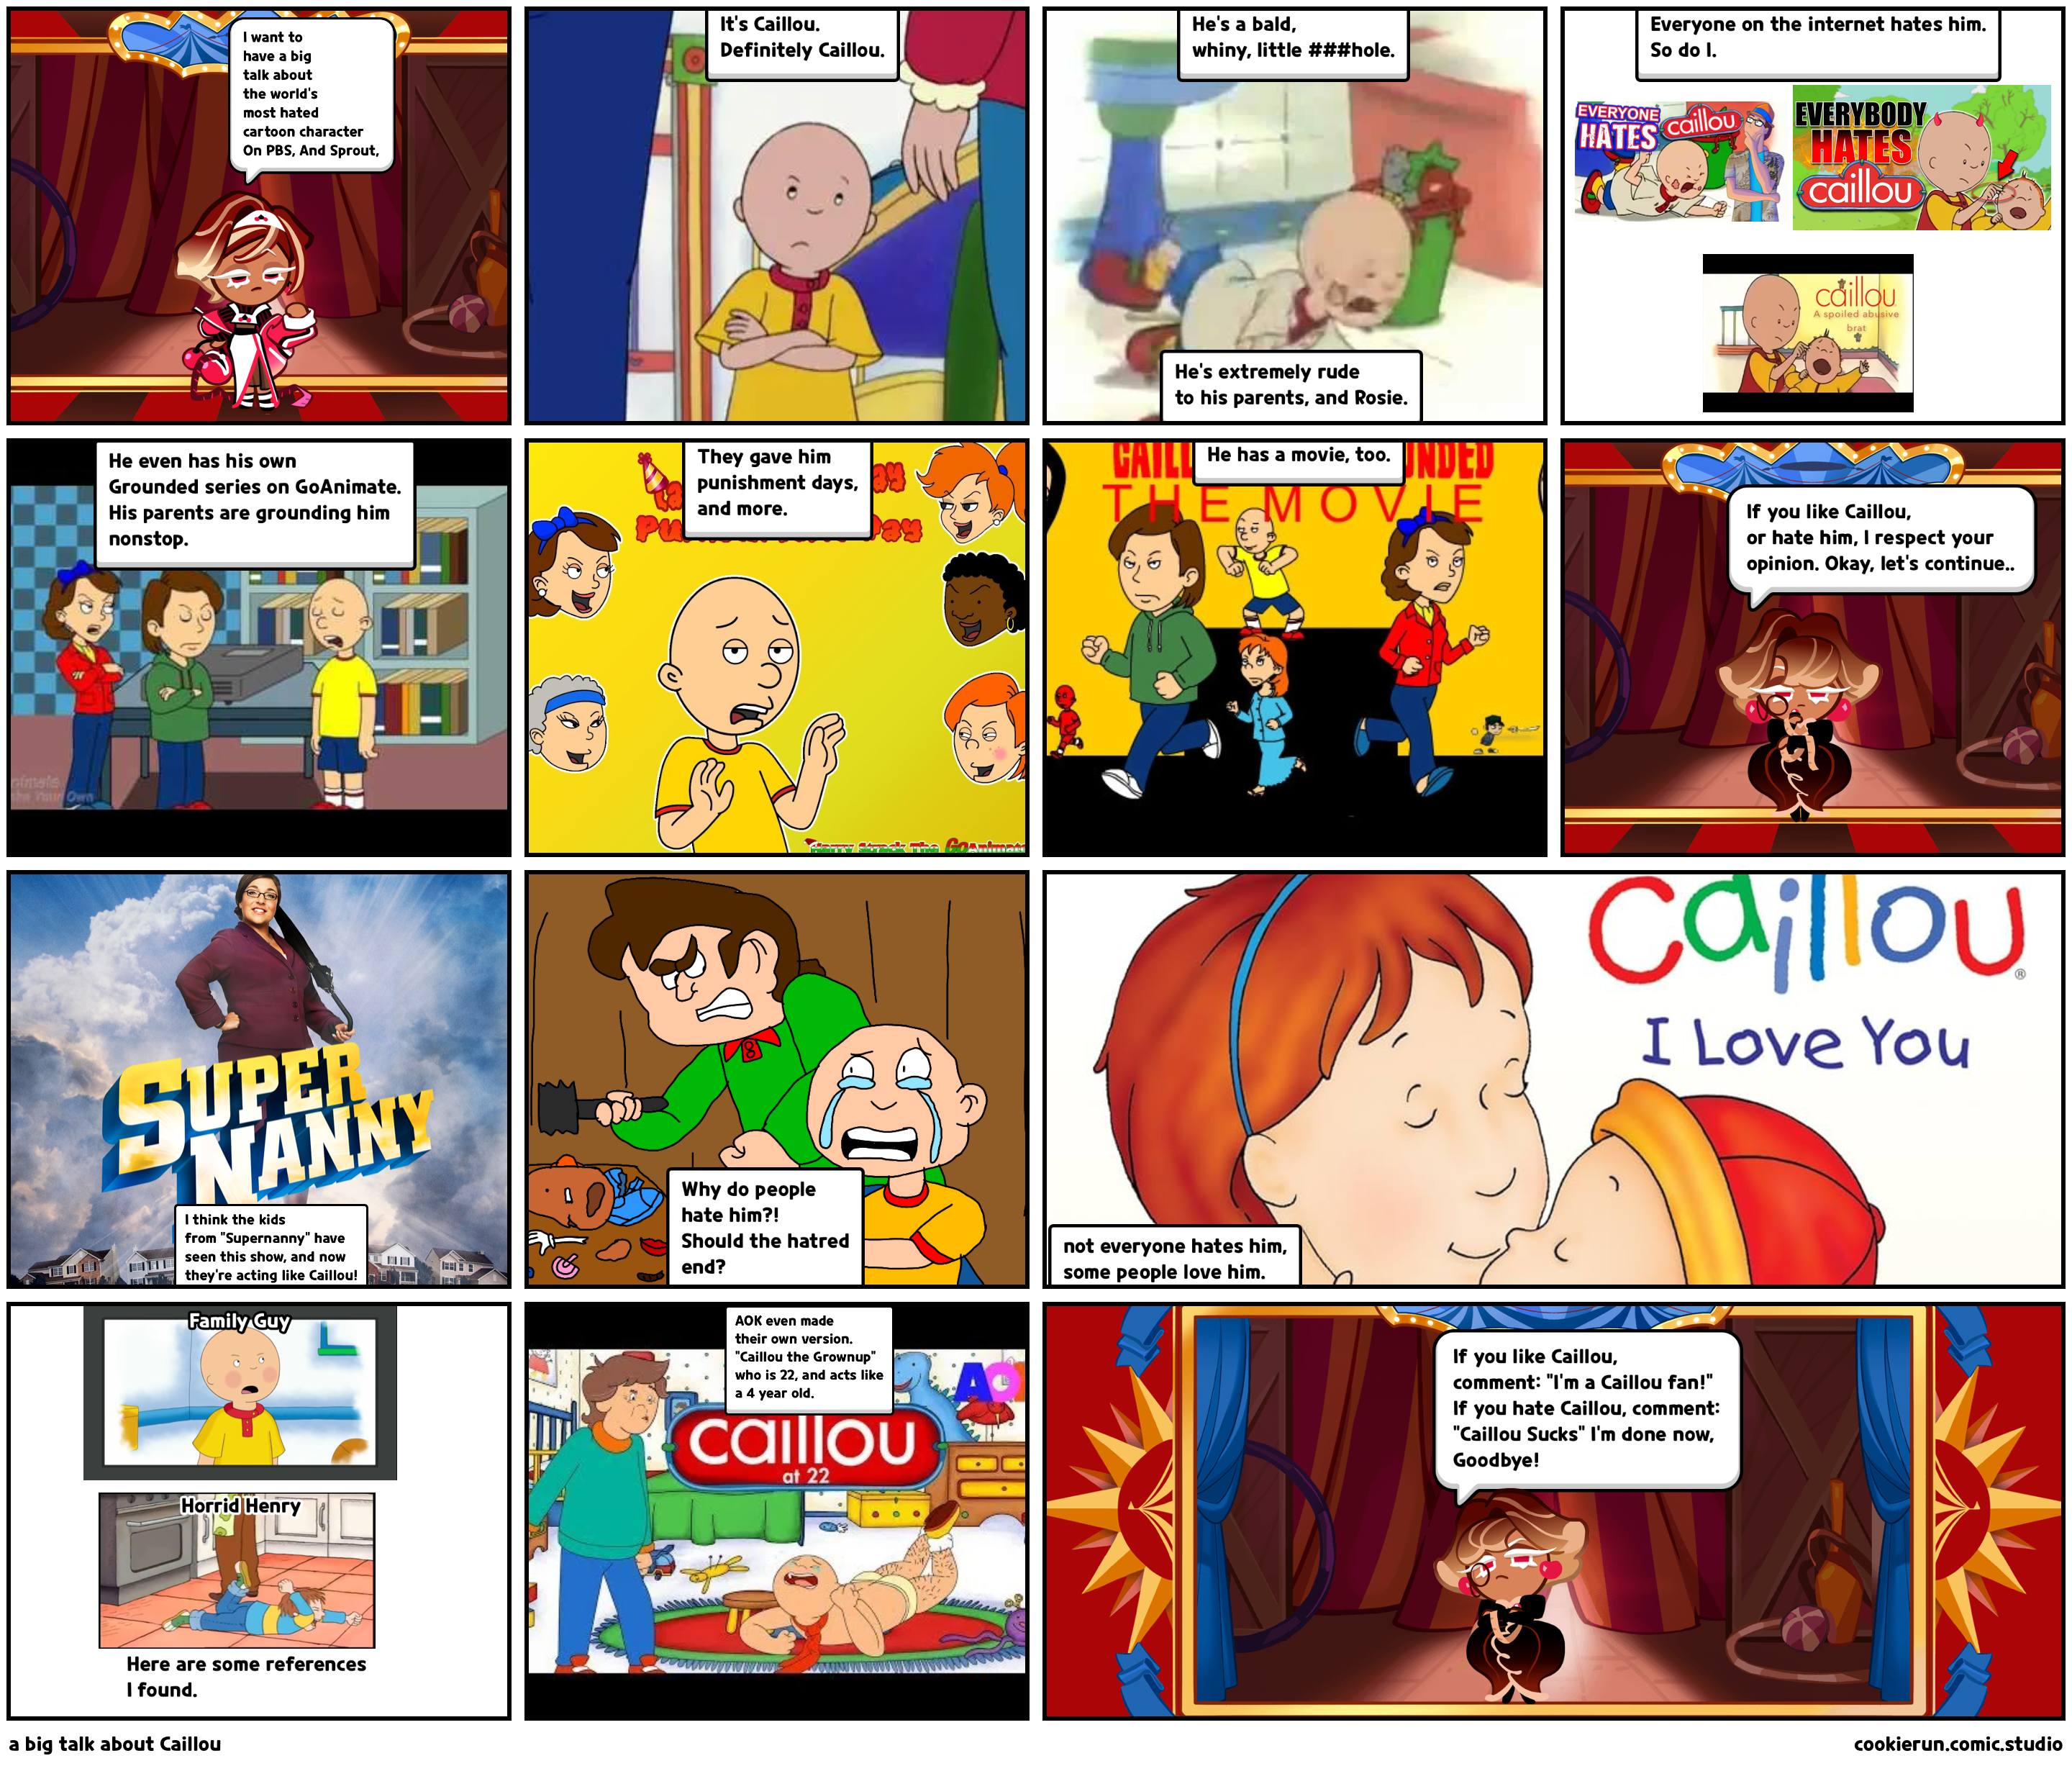 a big talk about Caillou 